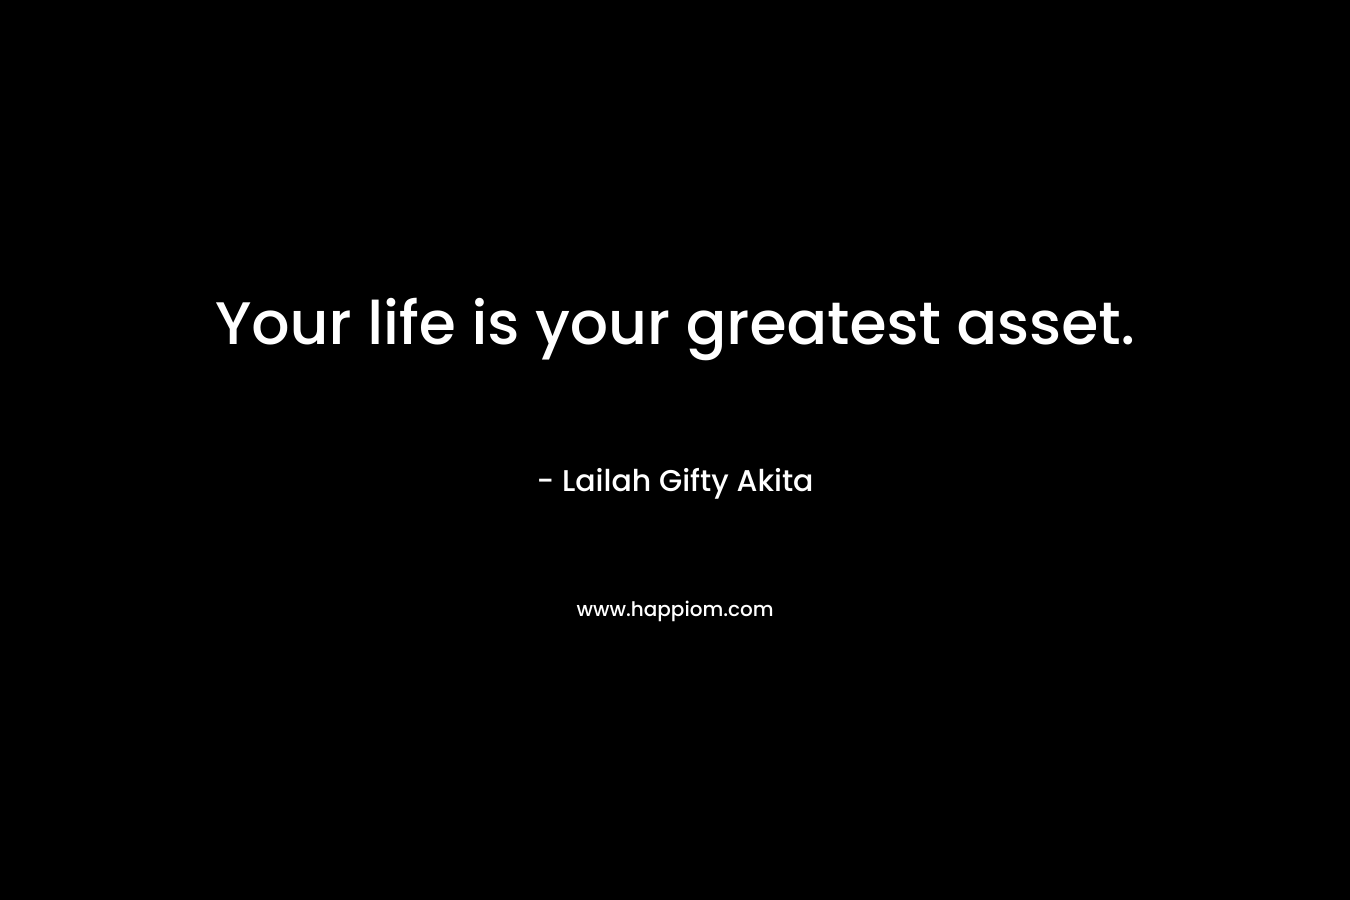 Your life is your greatest asset.